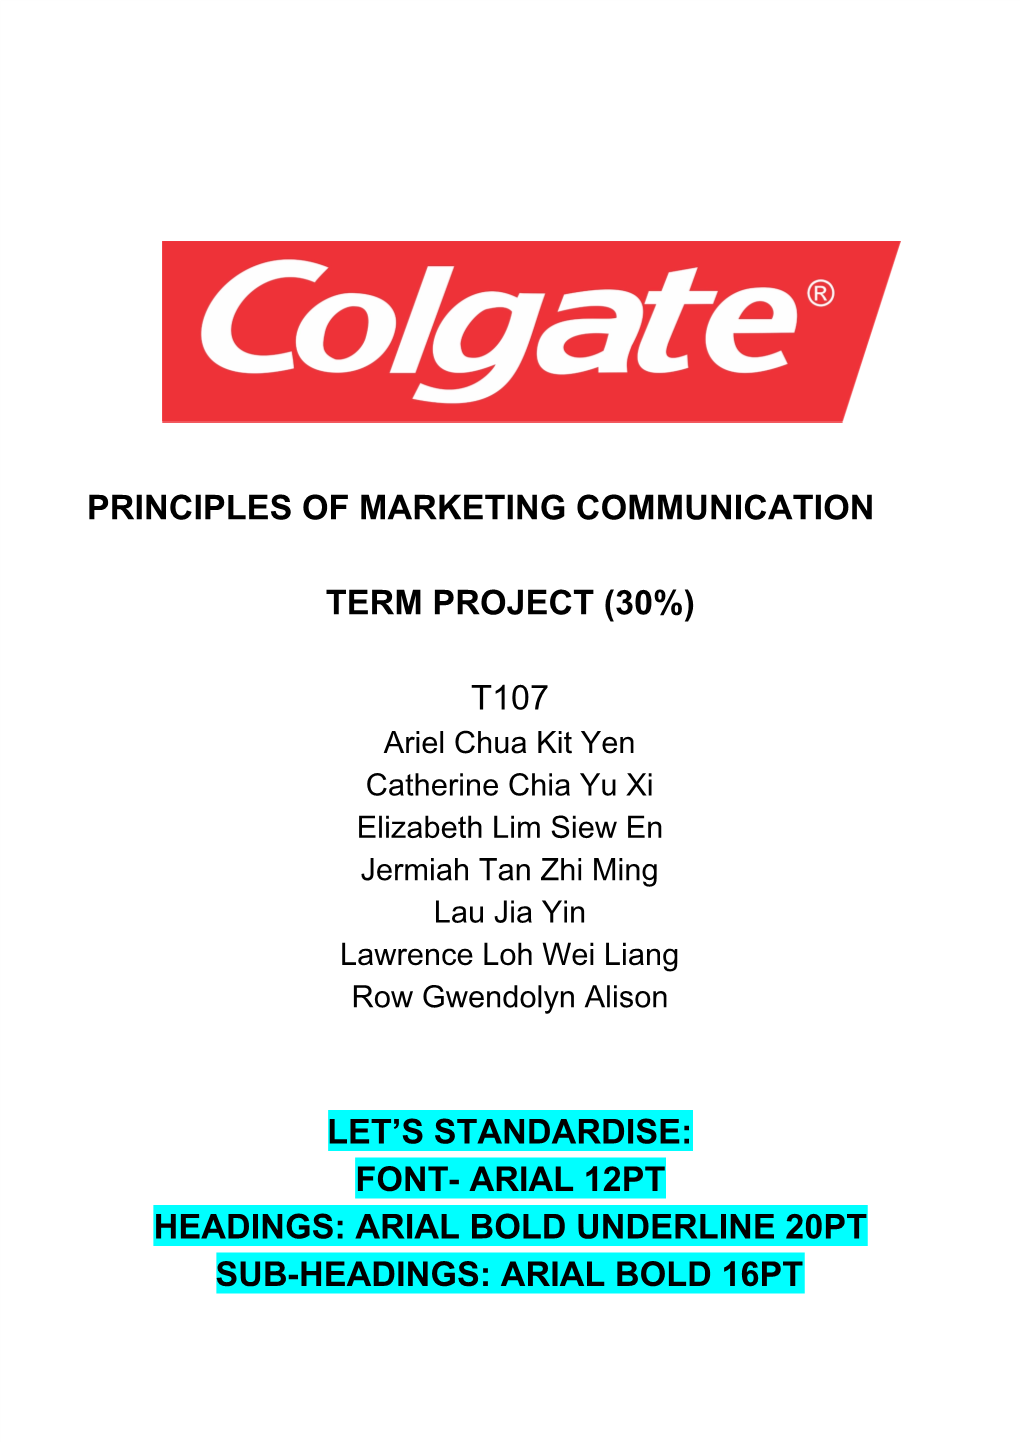 Principles of Marketing Communication Term Project